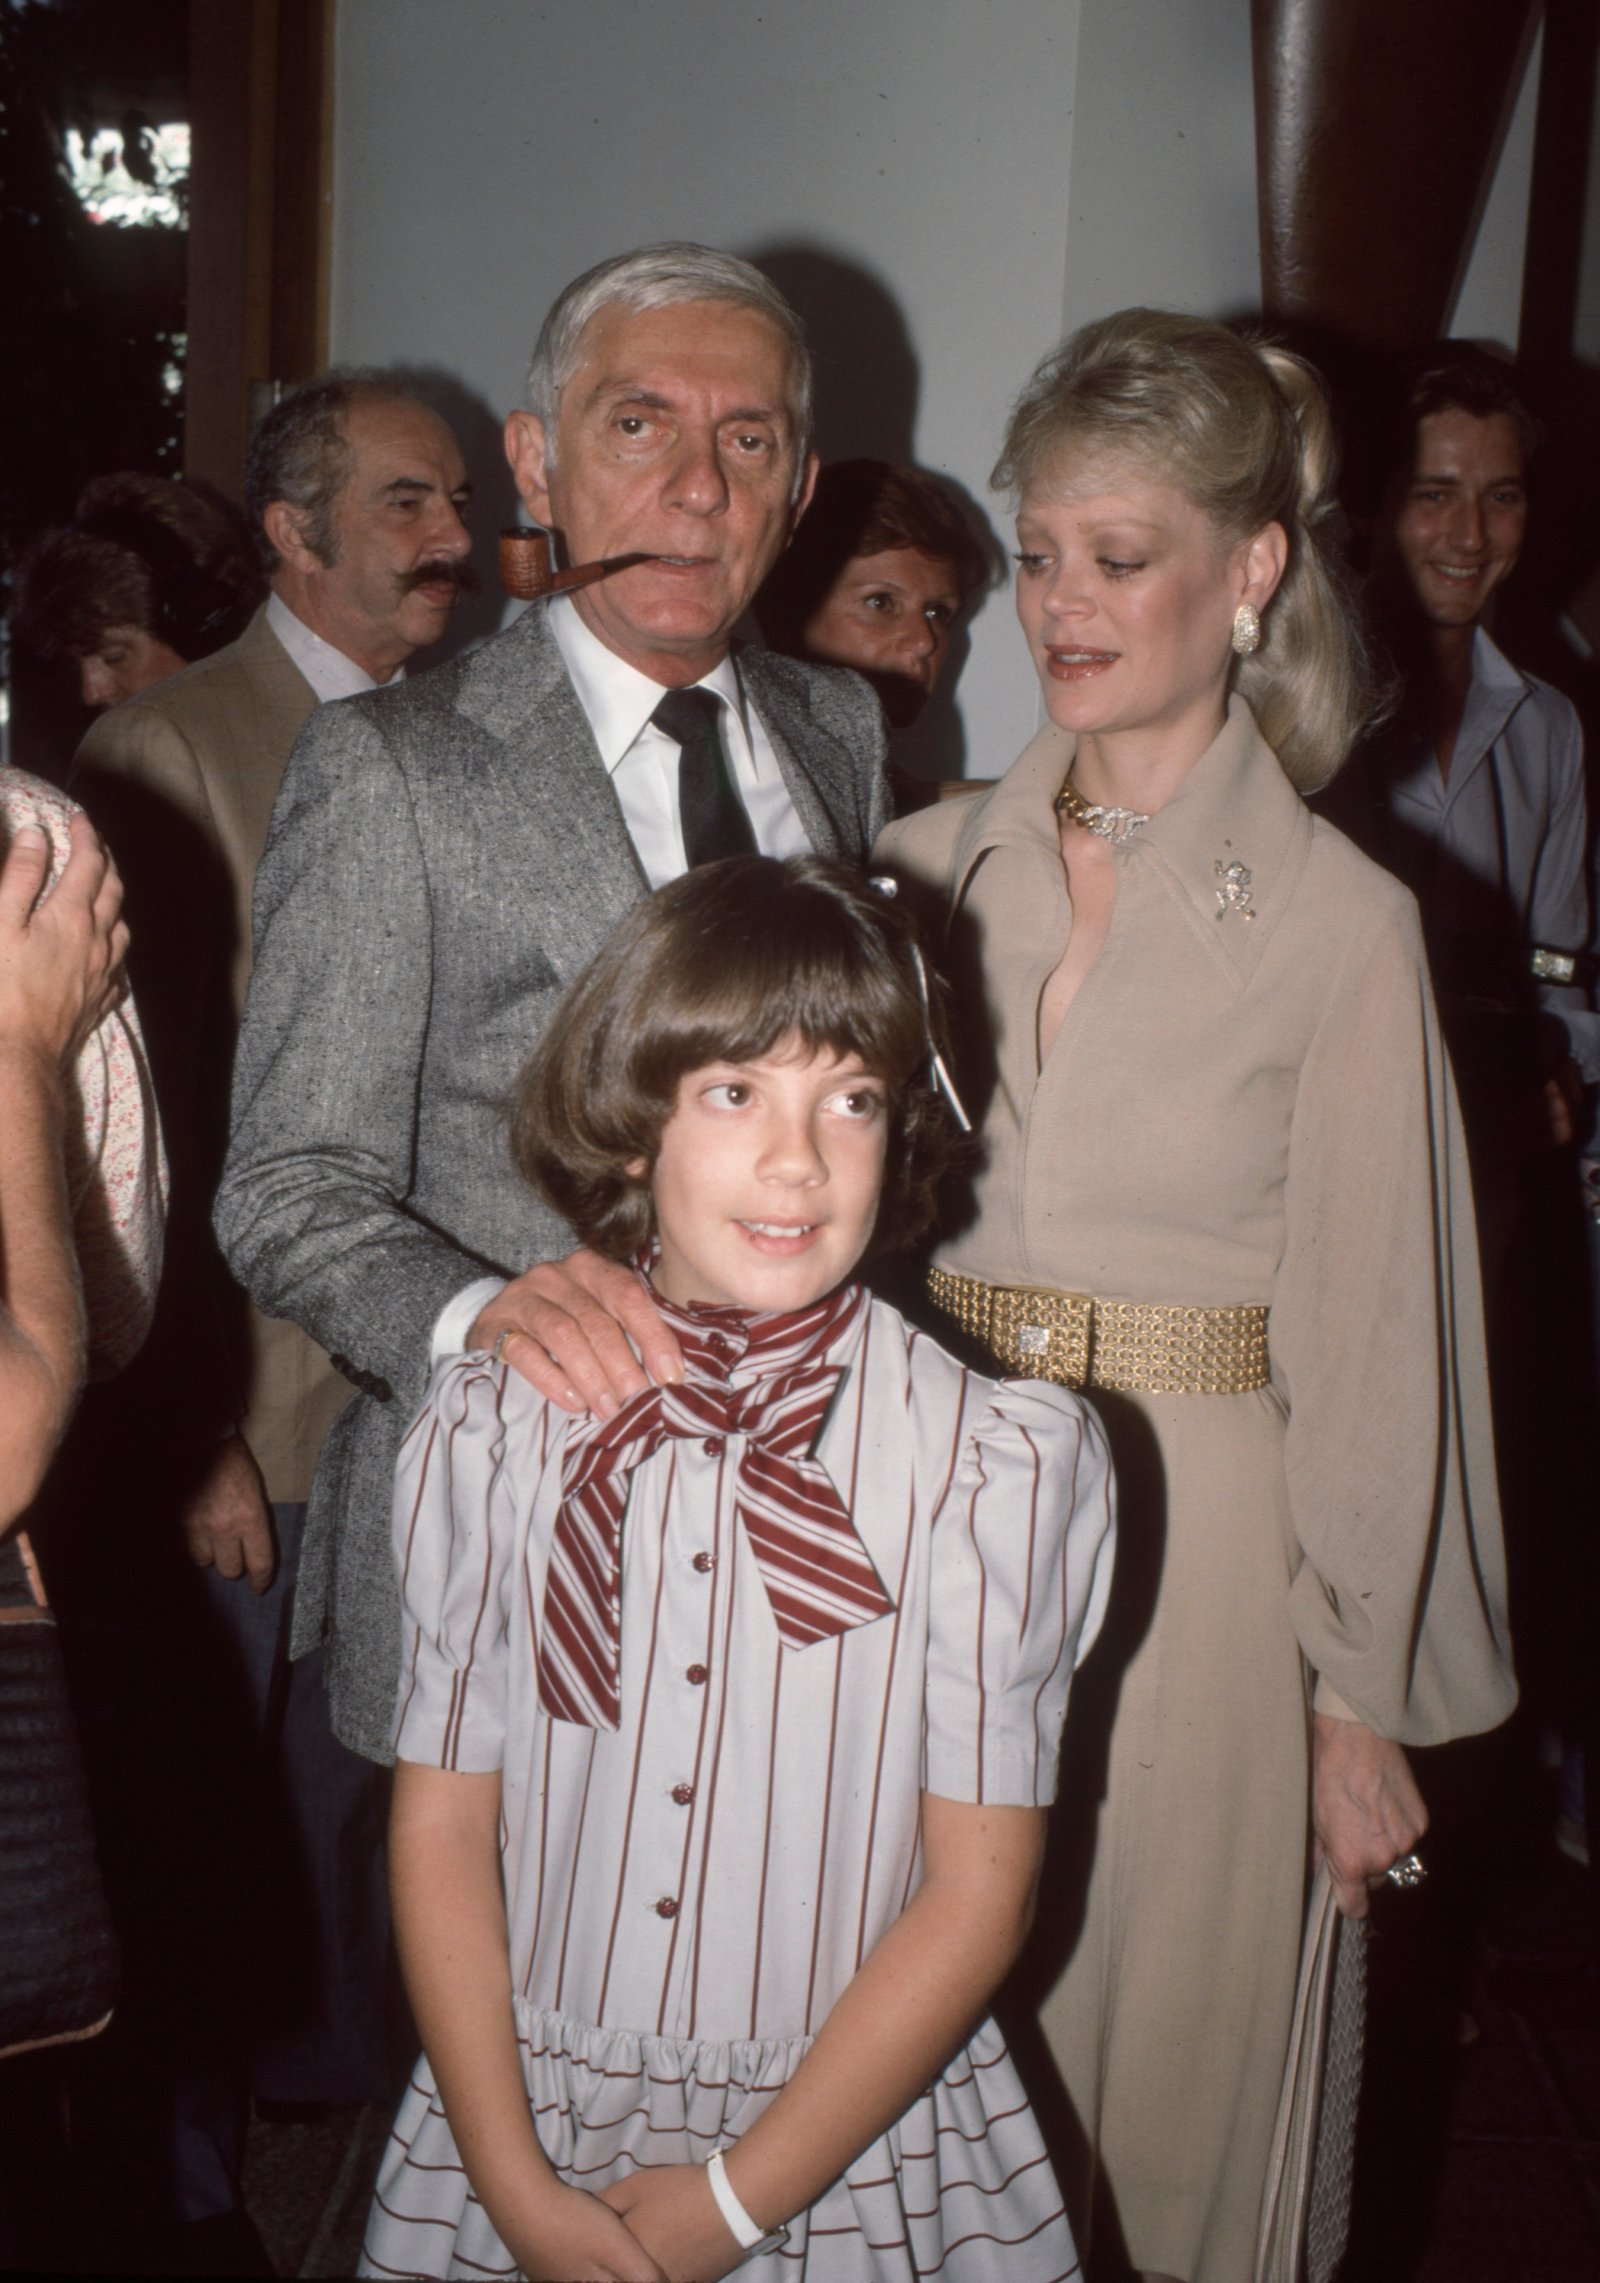 Tori Spelling, Aaron Spelling and Candy Spelling